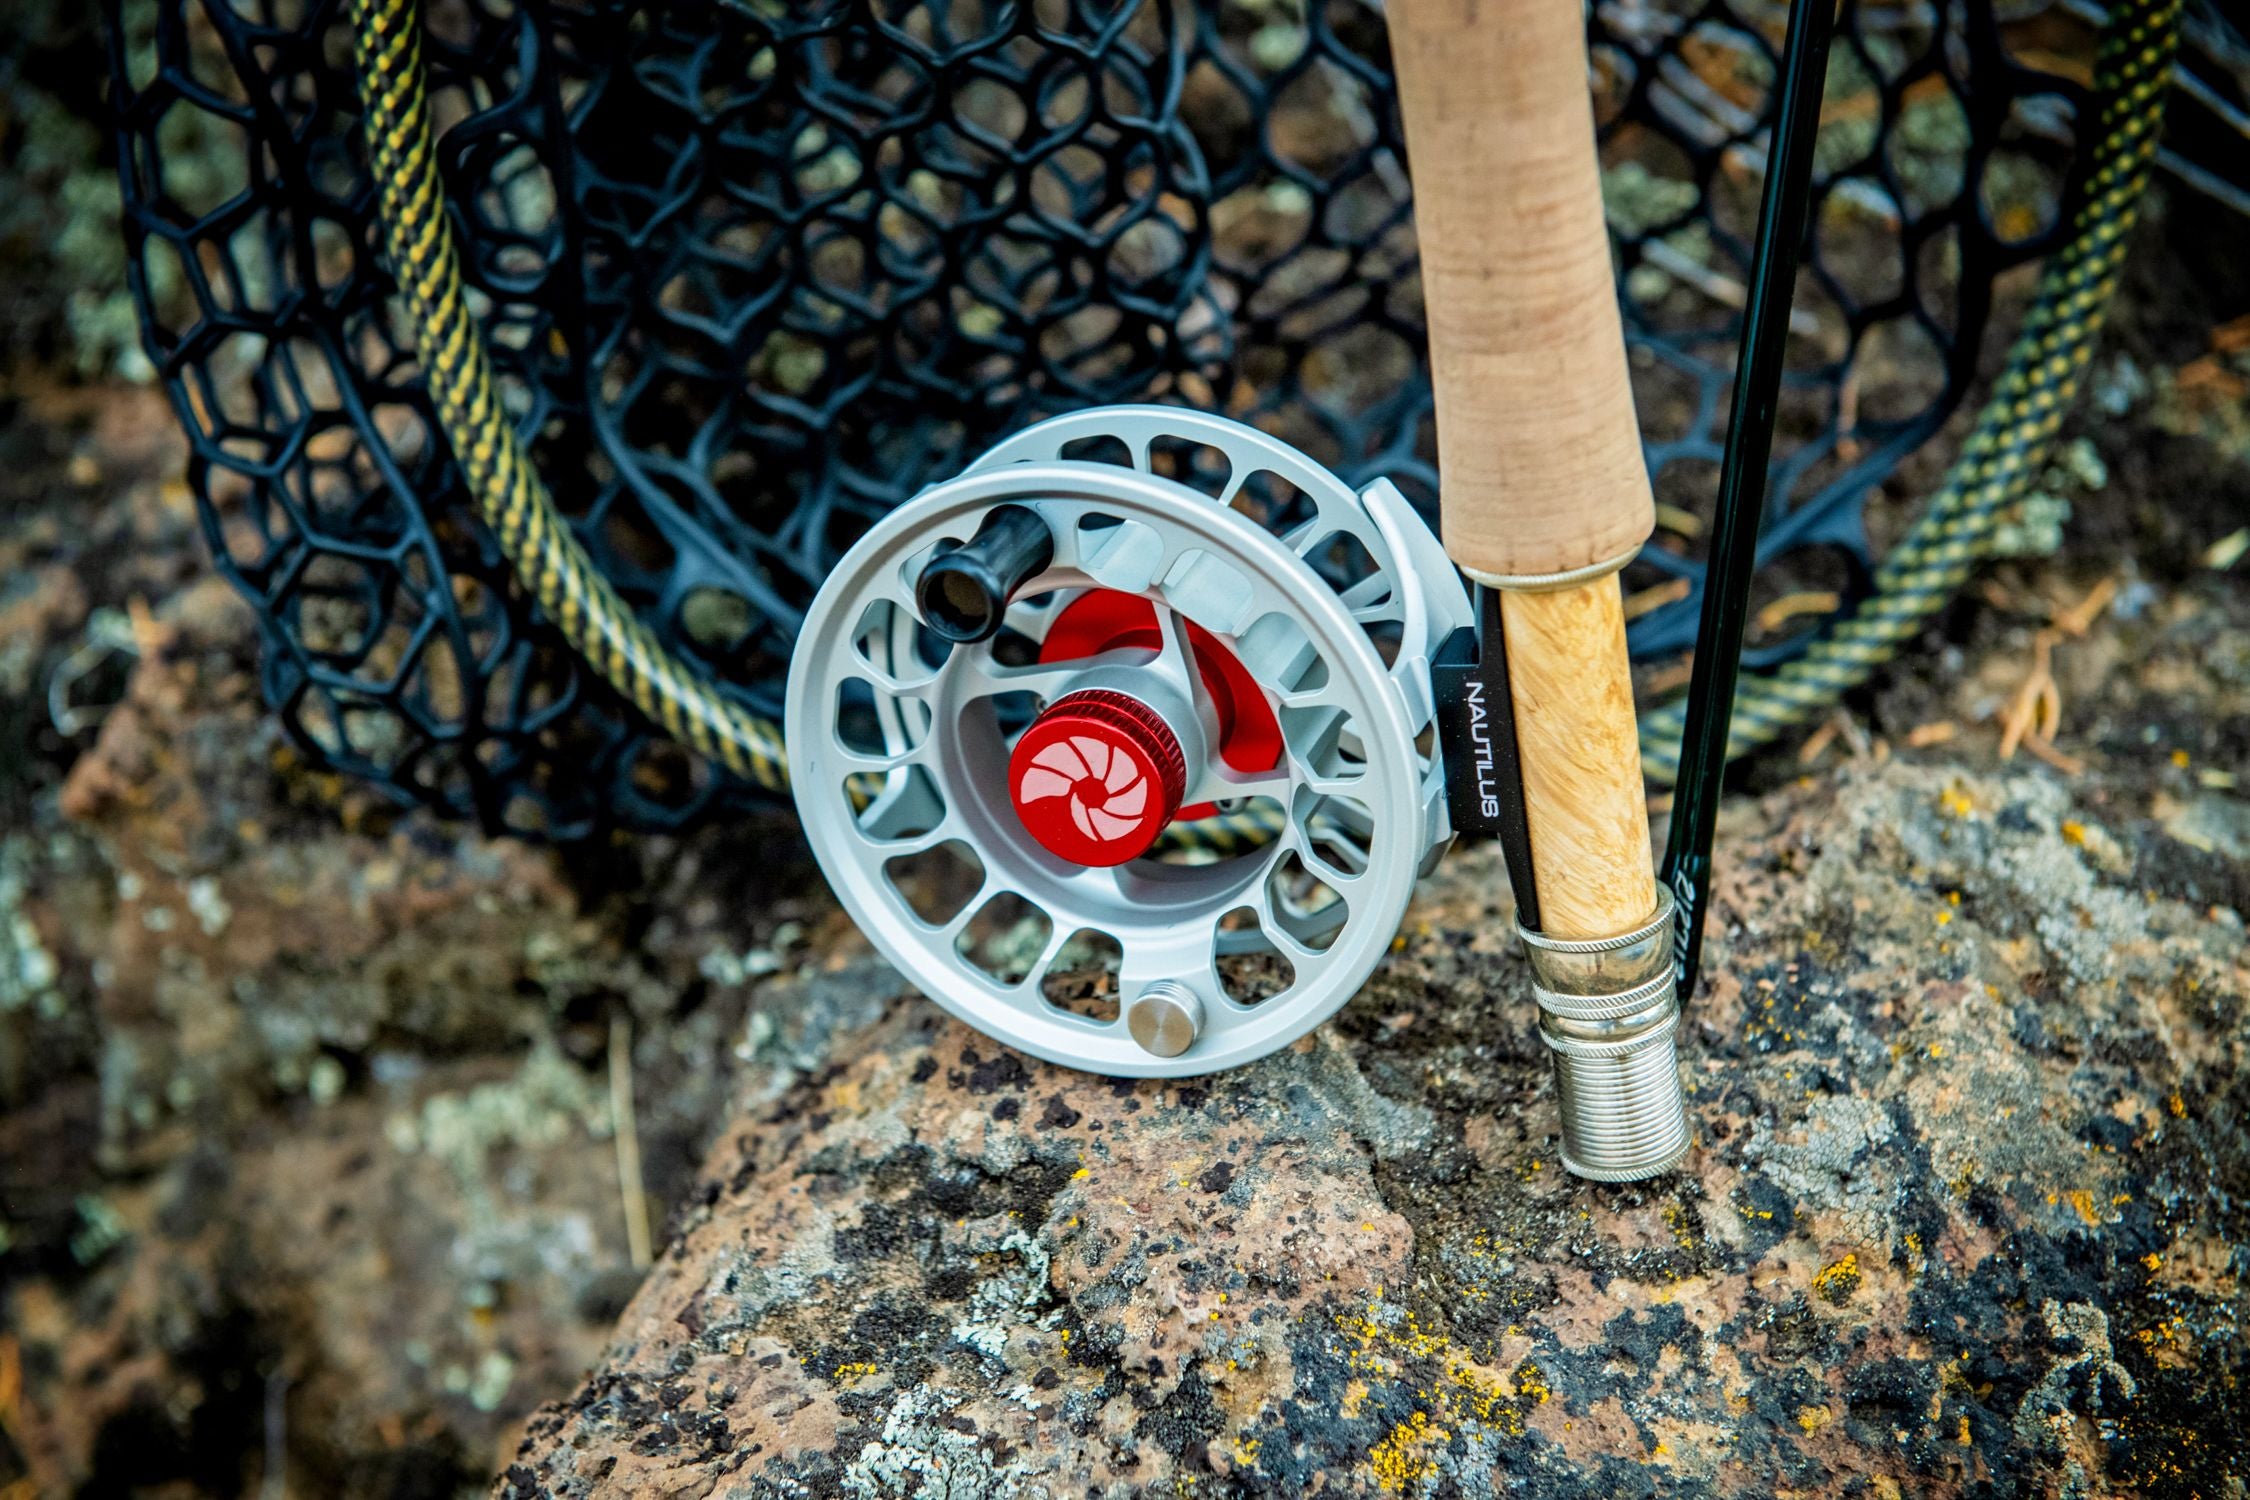 Nautilus X-Series Fly Reel - Fin & Fire Fly Shop